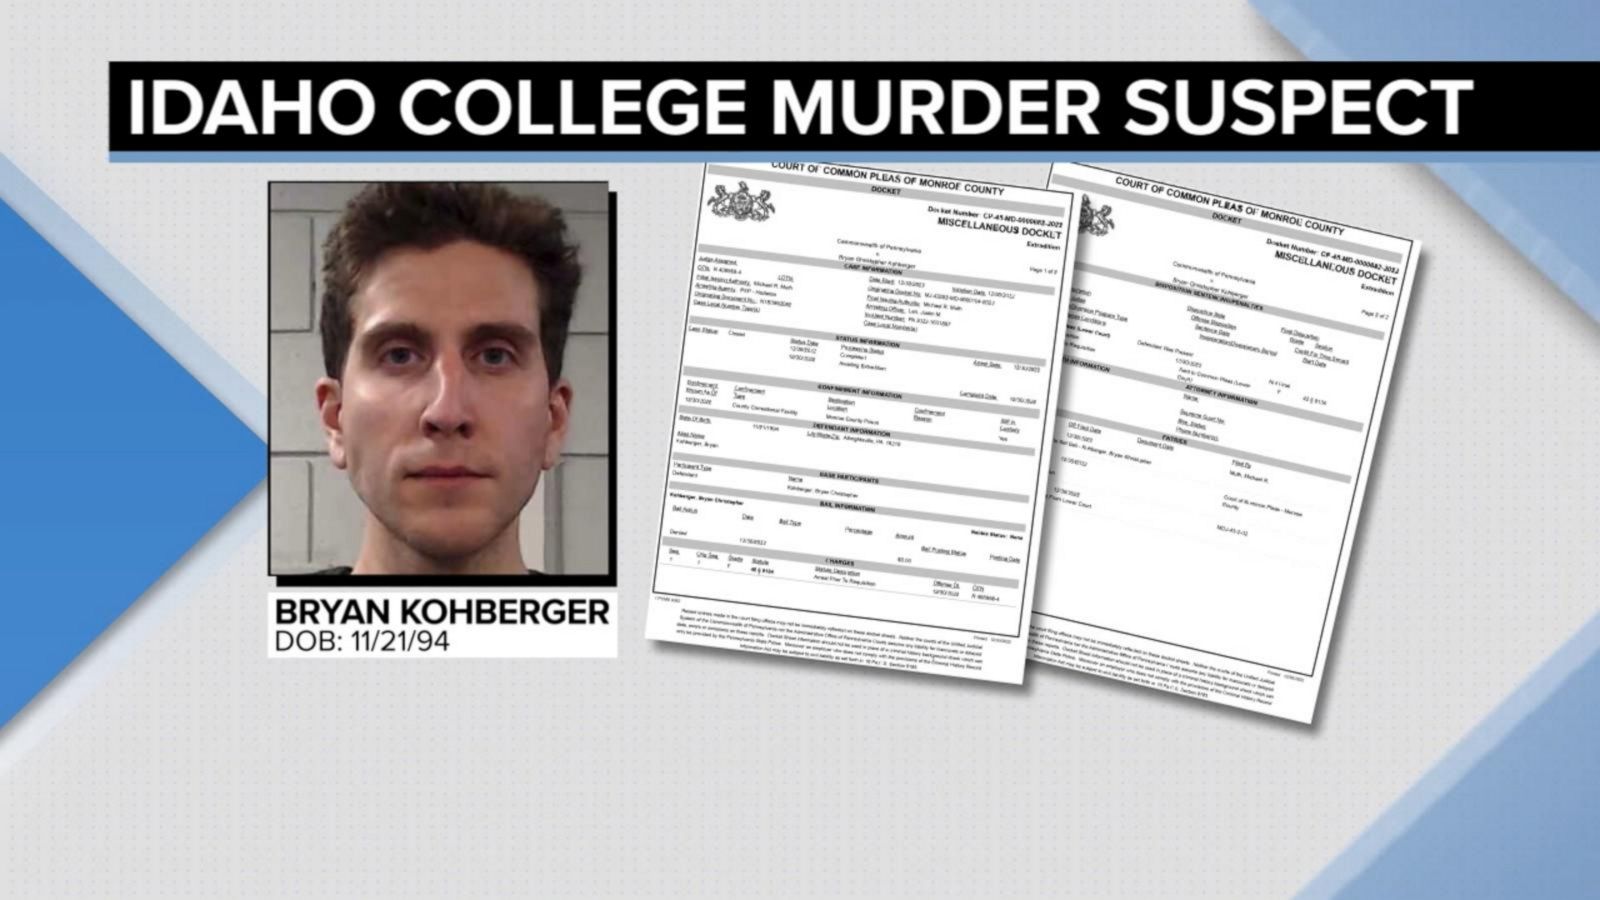 Investigators probe Bryan Kohberger's social media in connection with Idaho  college murders - ABC News